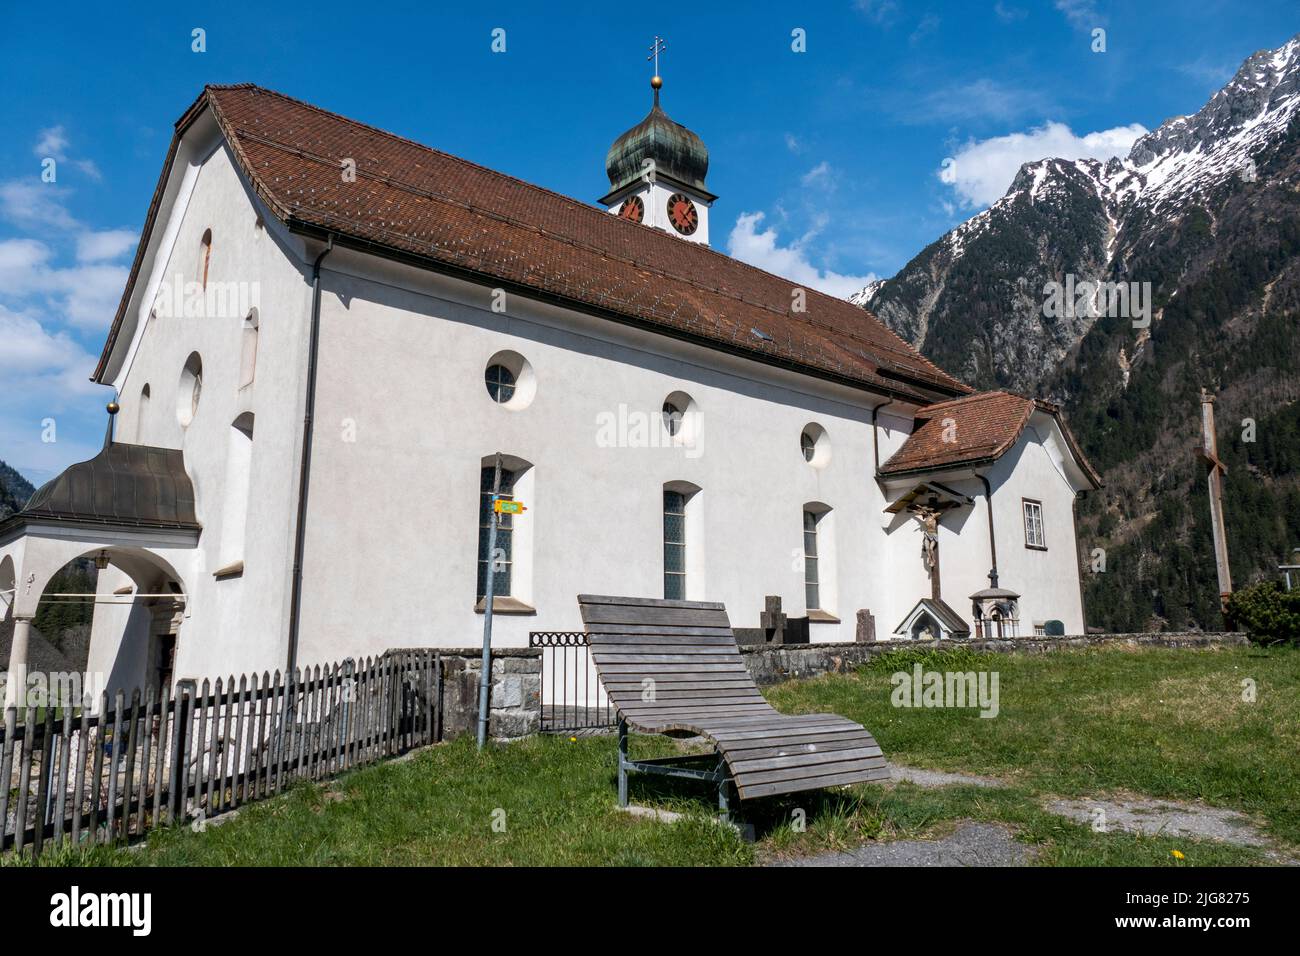 A low angle shot of the Wassen Church St Gallus surrounded by the Alps in Switzerland Stock Photo